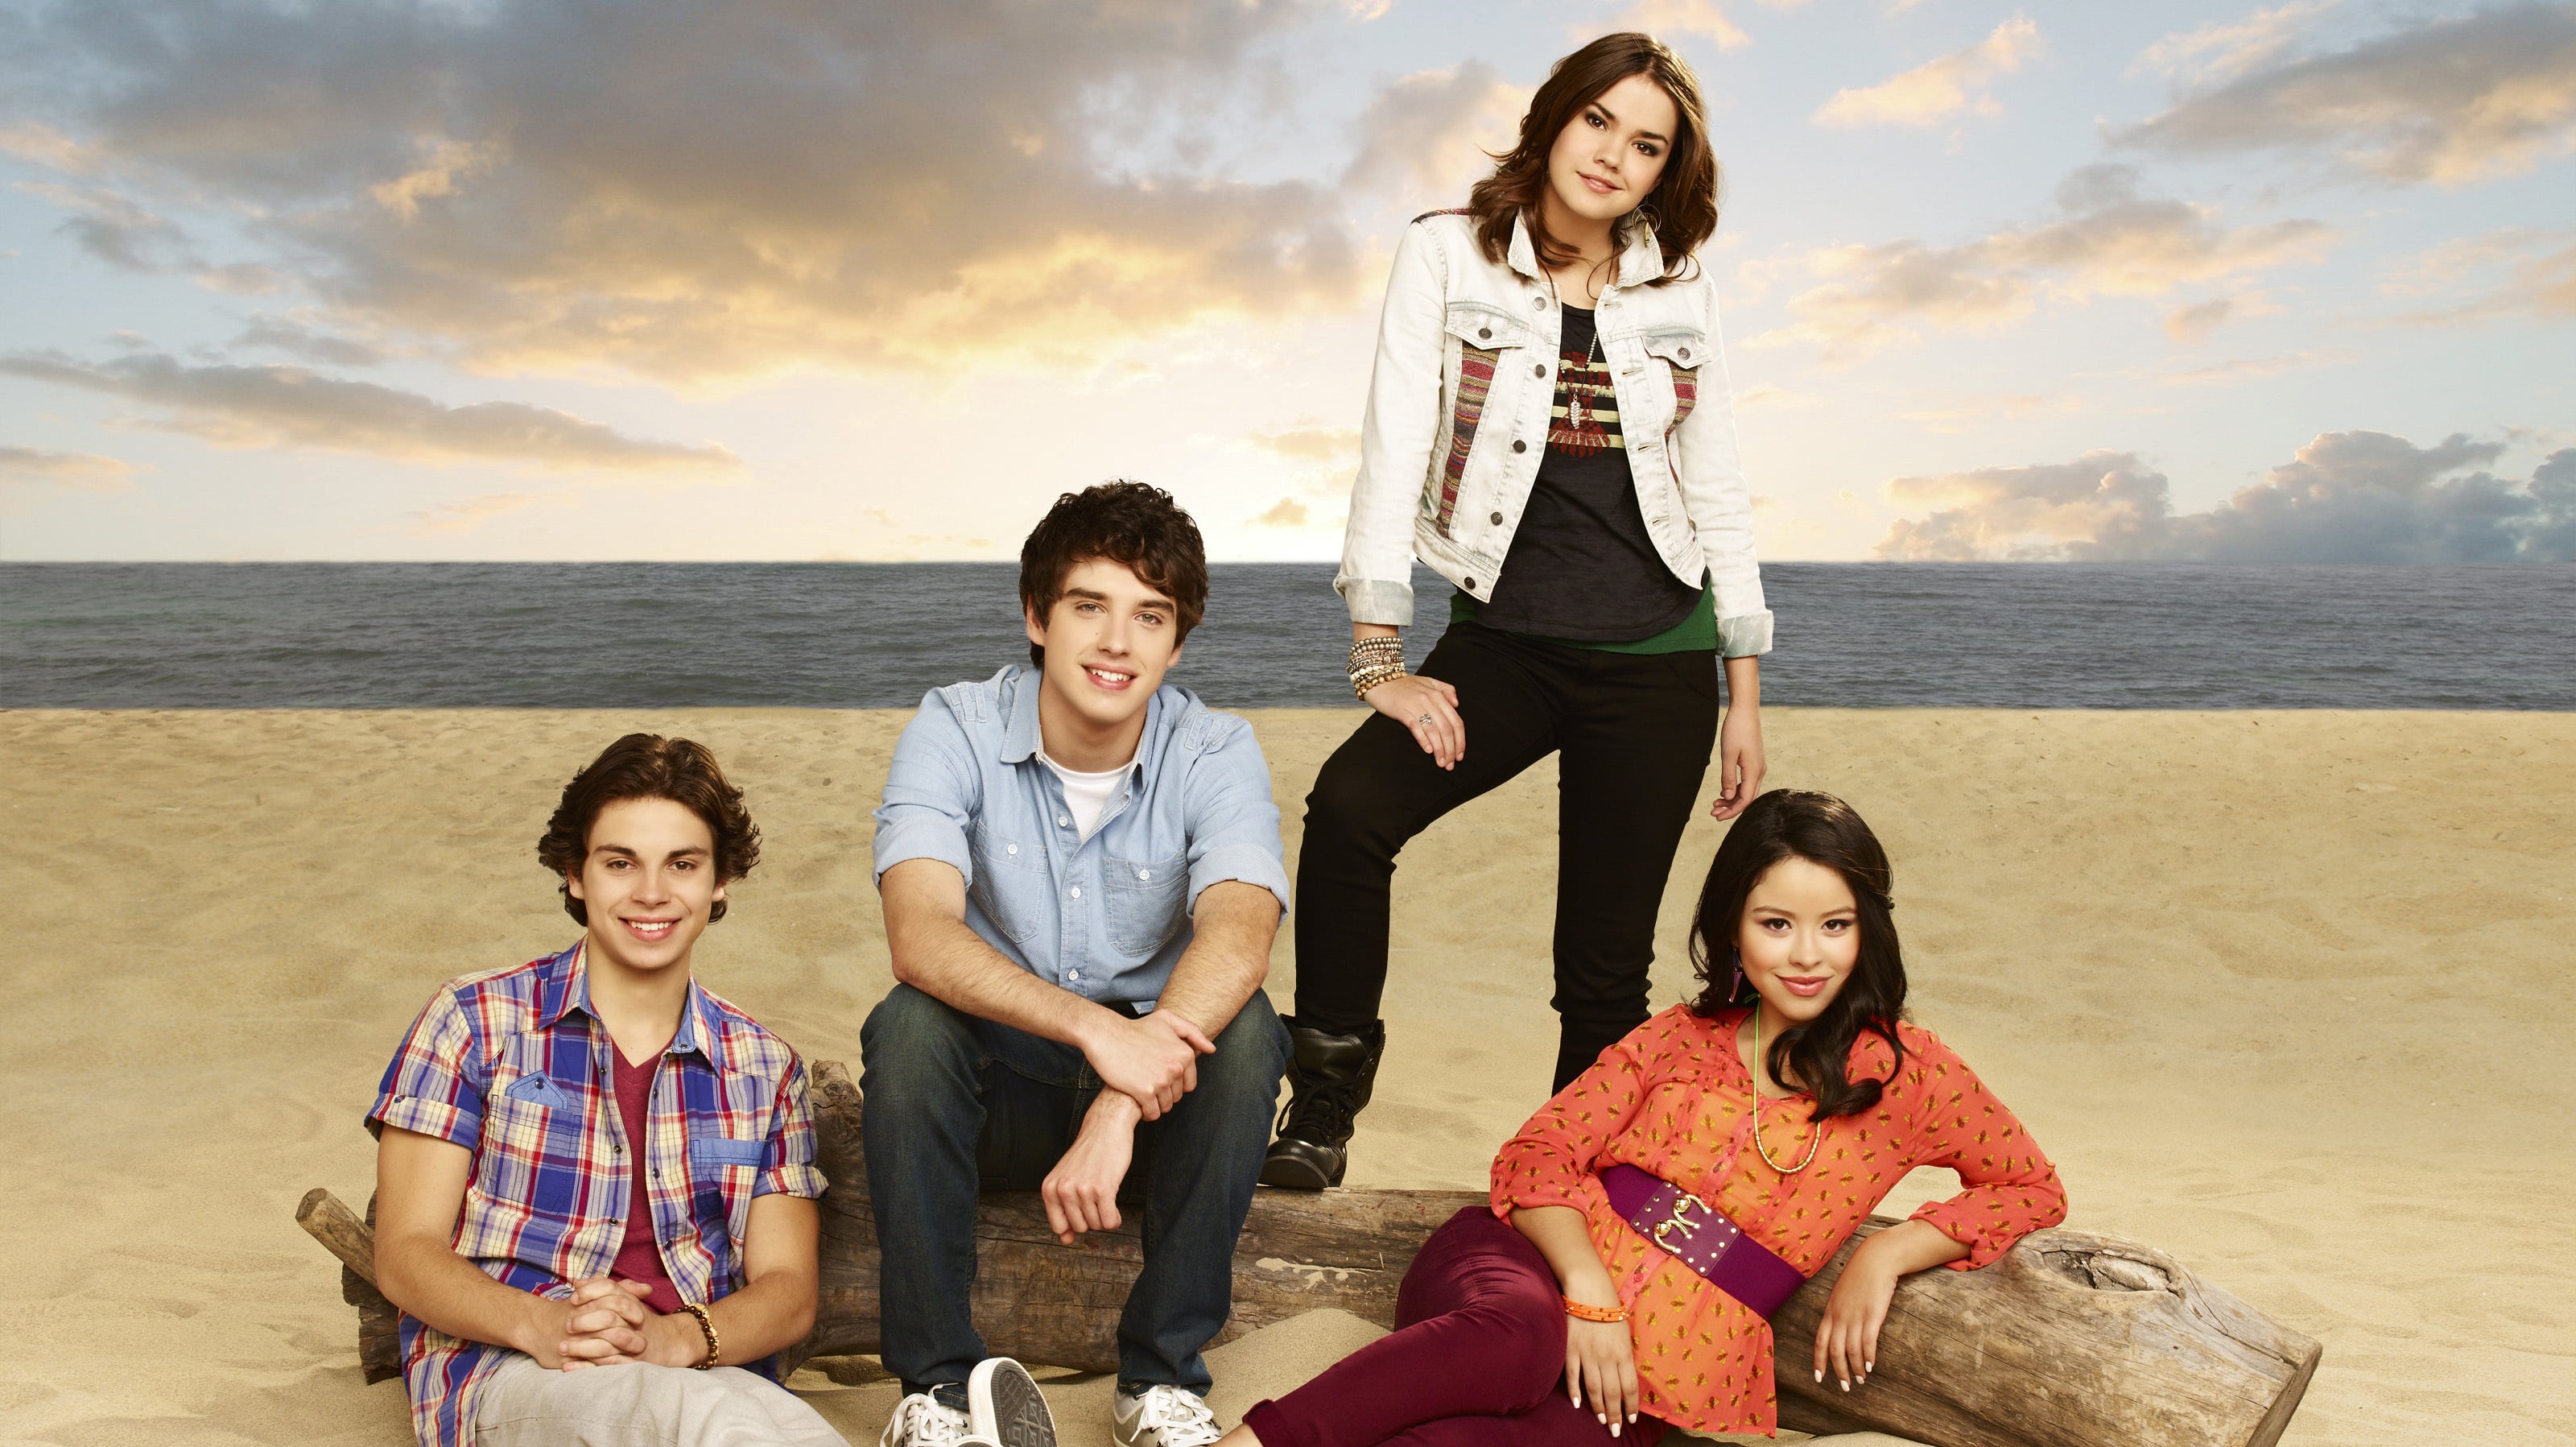 TV Show The Fosters HD Wallpaper | Background Image